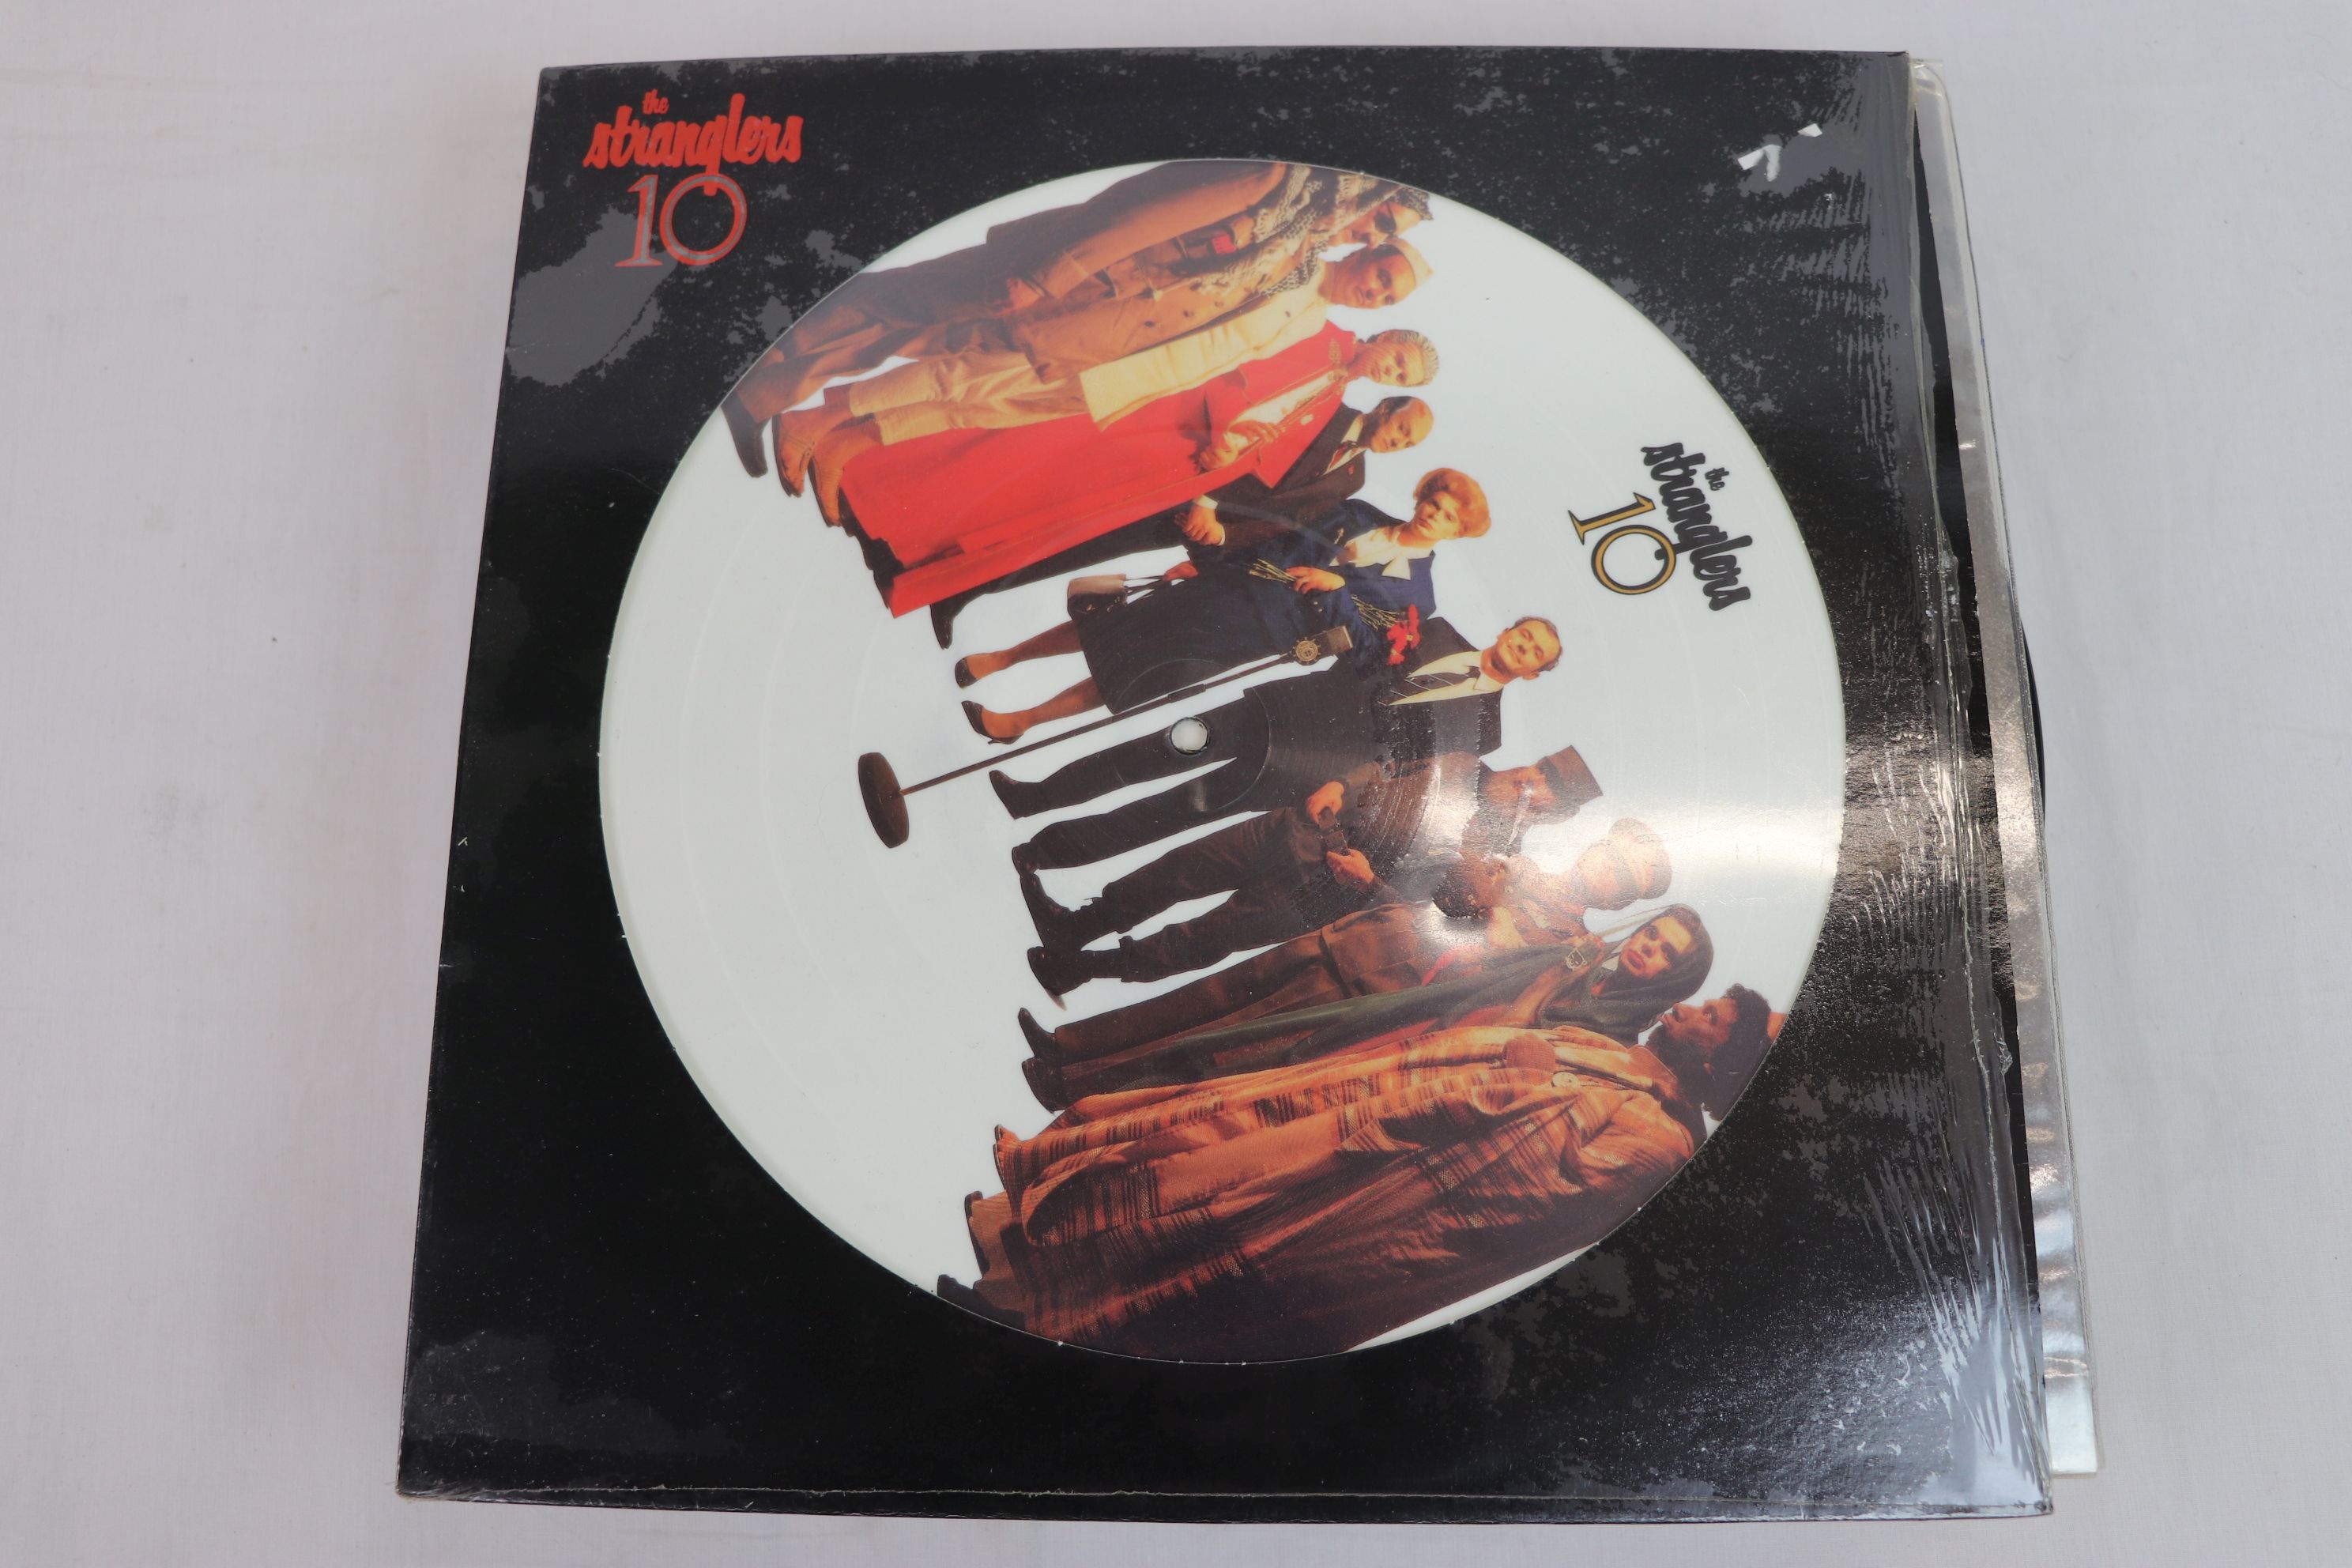 Vinyl - The Stranglers - Collection of 24 x 12" Singles, 3 x picture discs and 3 x LPs (The Raven, - Image 6 of 12